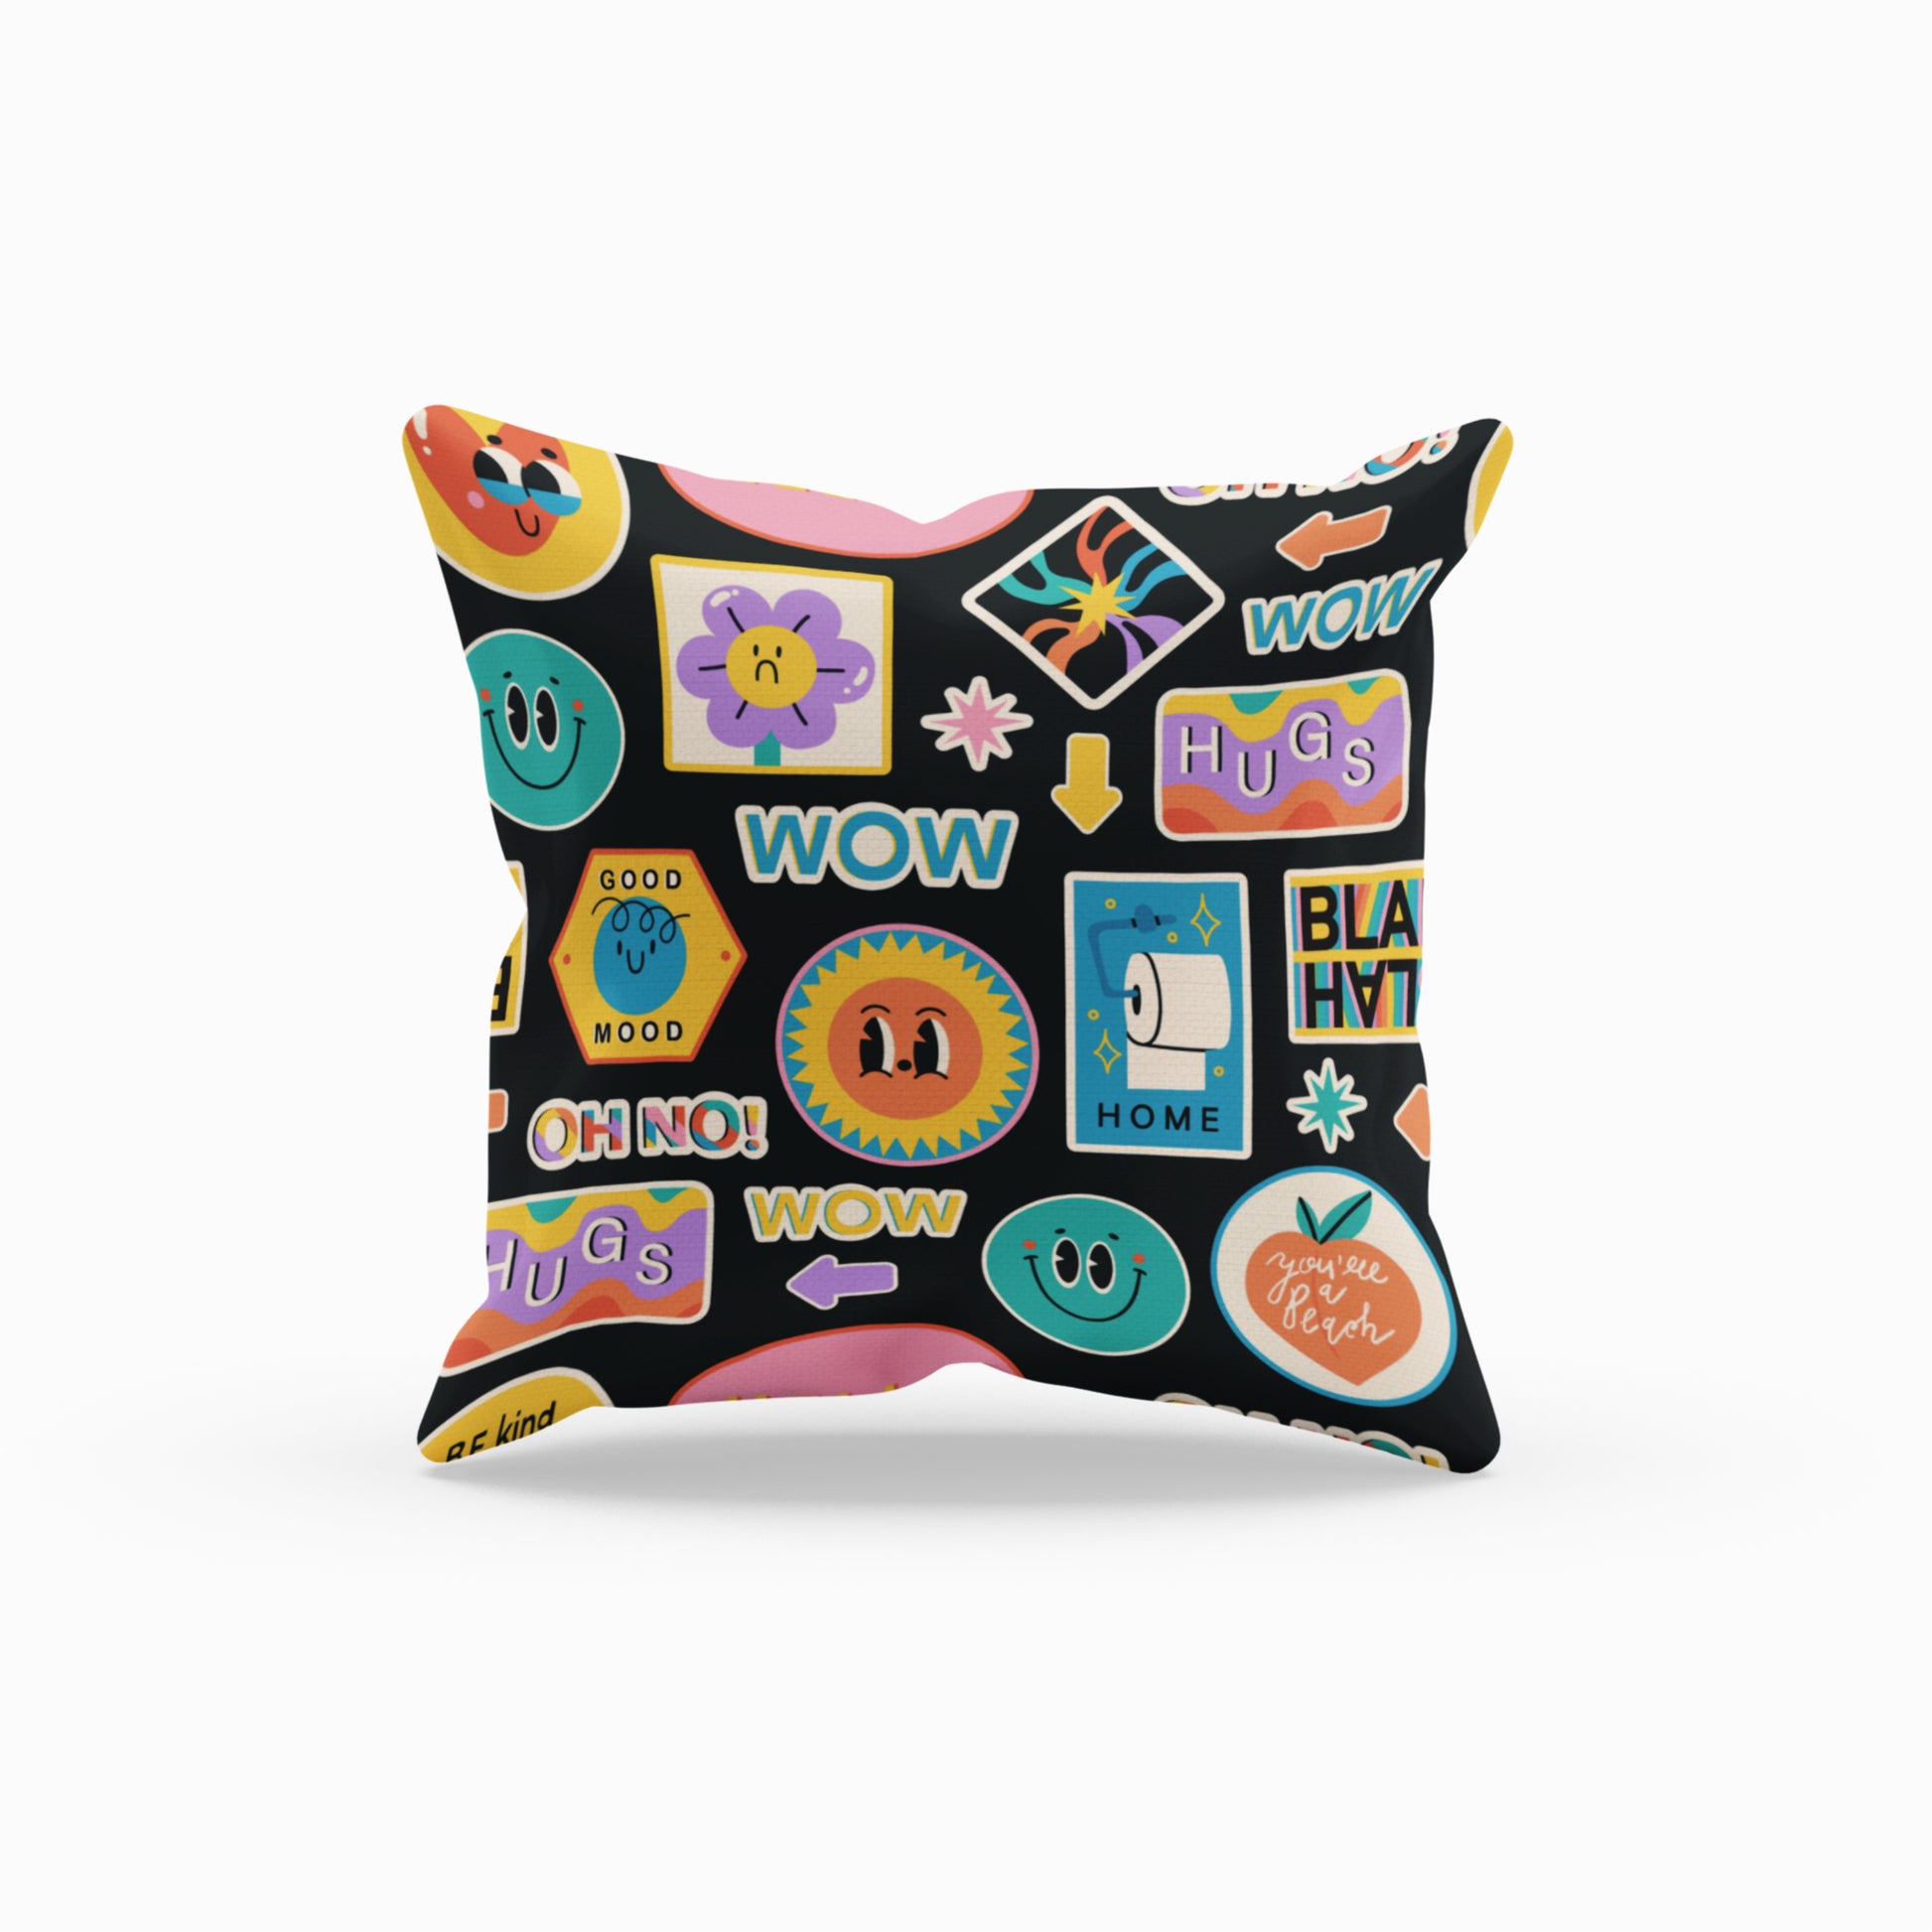 Stylish Printed Throw Pillow with Pop Art Design